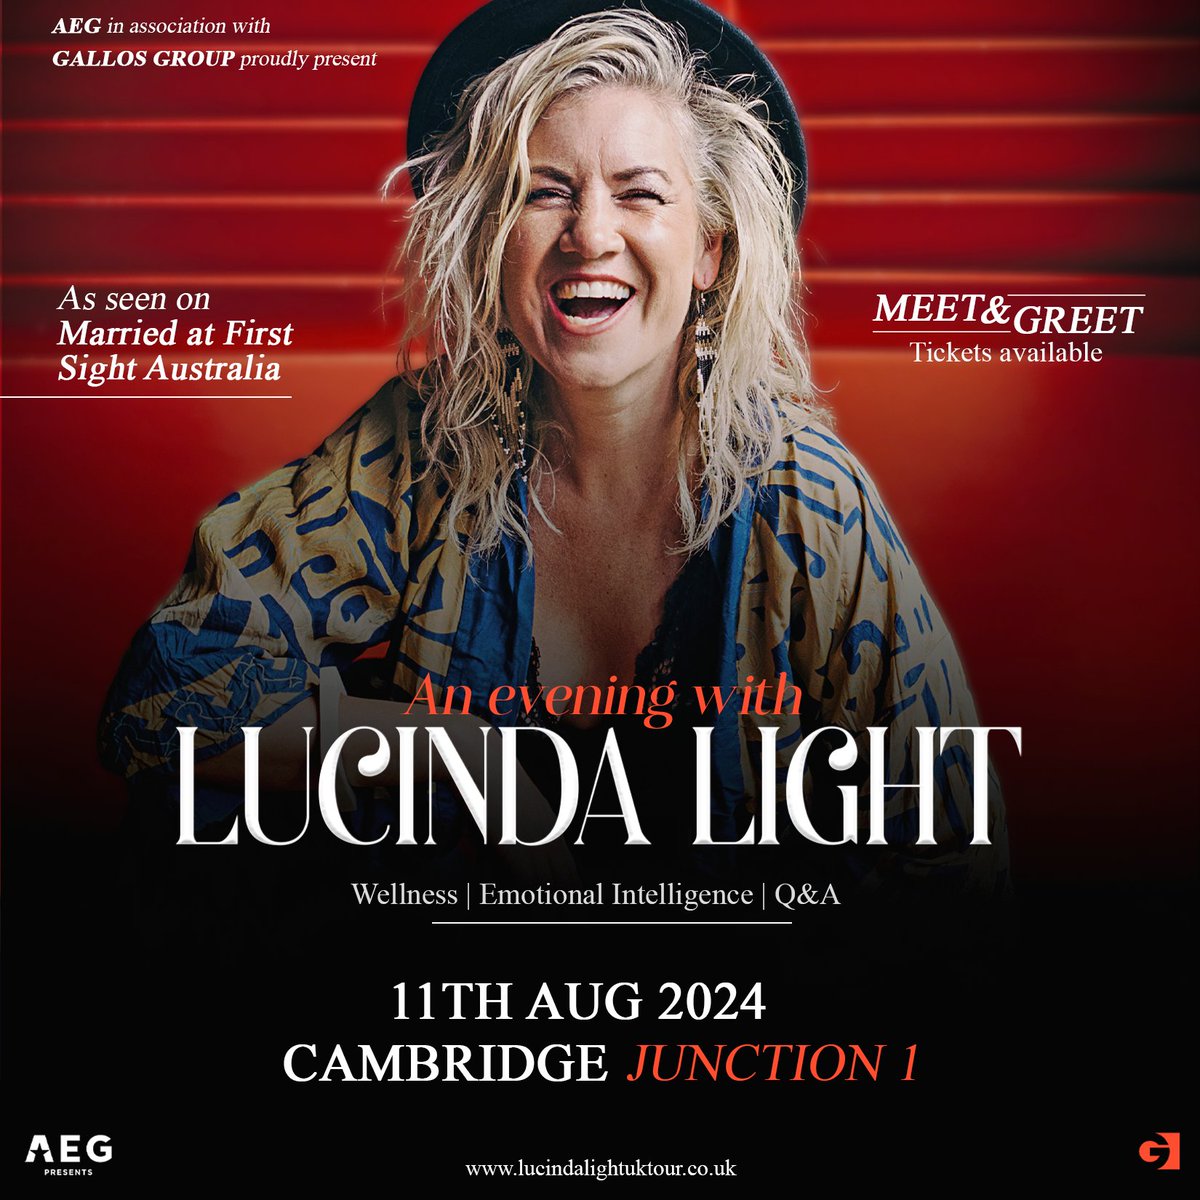 JUST ANNOUNCED Lucinda Light • Sun 11 Aug Married at First Sight Australia's season 11 breakout star comes to Cambridge Junction. • Members pre-sale opens 9am Thu 09 May • On general sale 9am Fri 10 May junction.co.uk/events/lucinda…